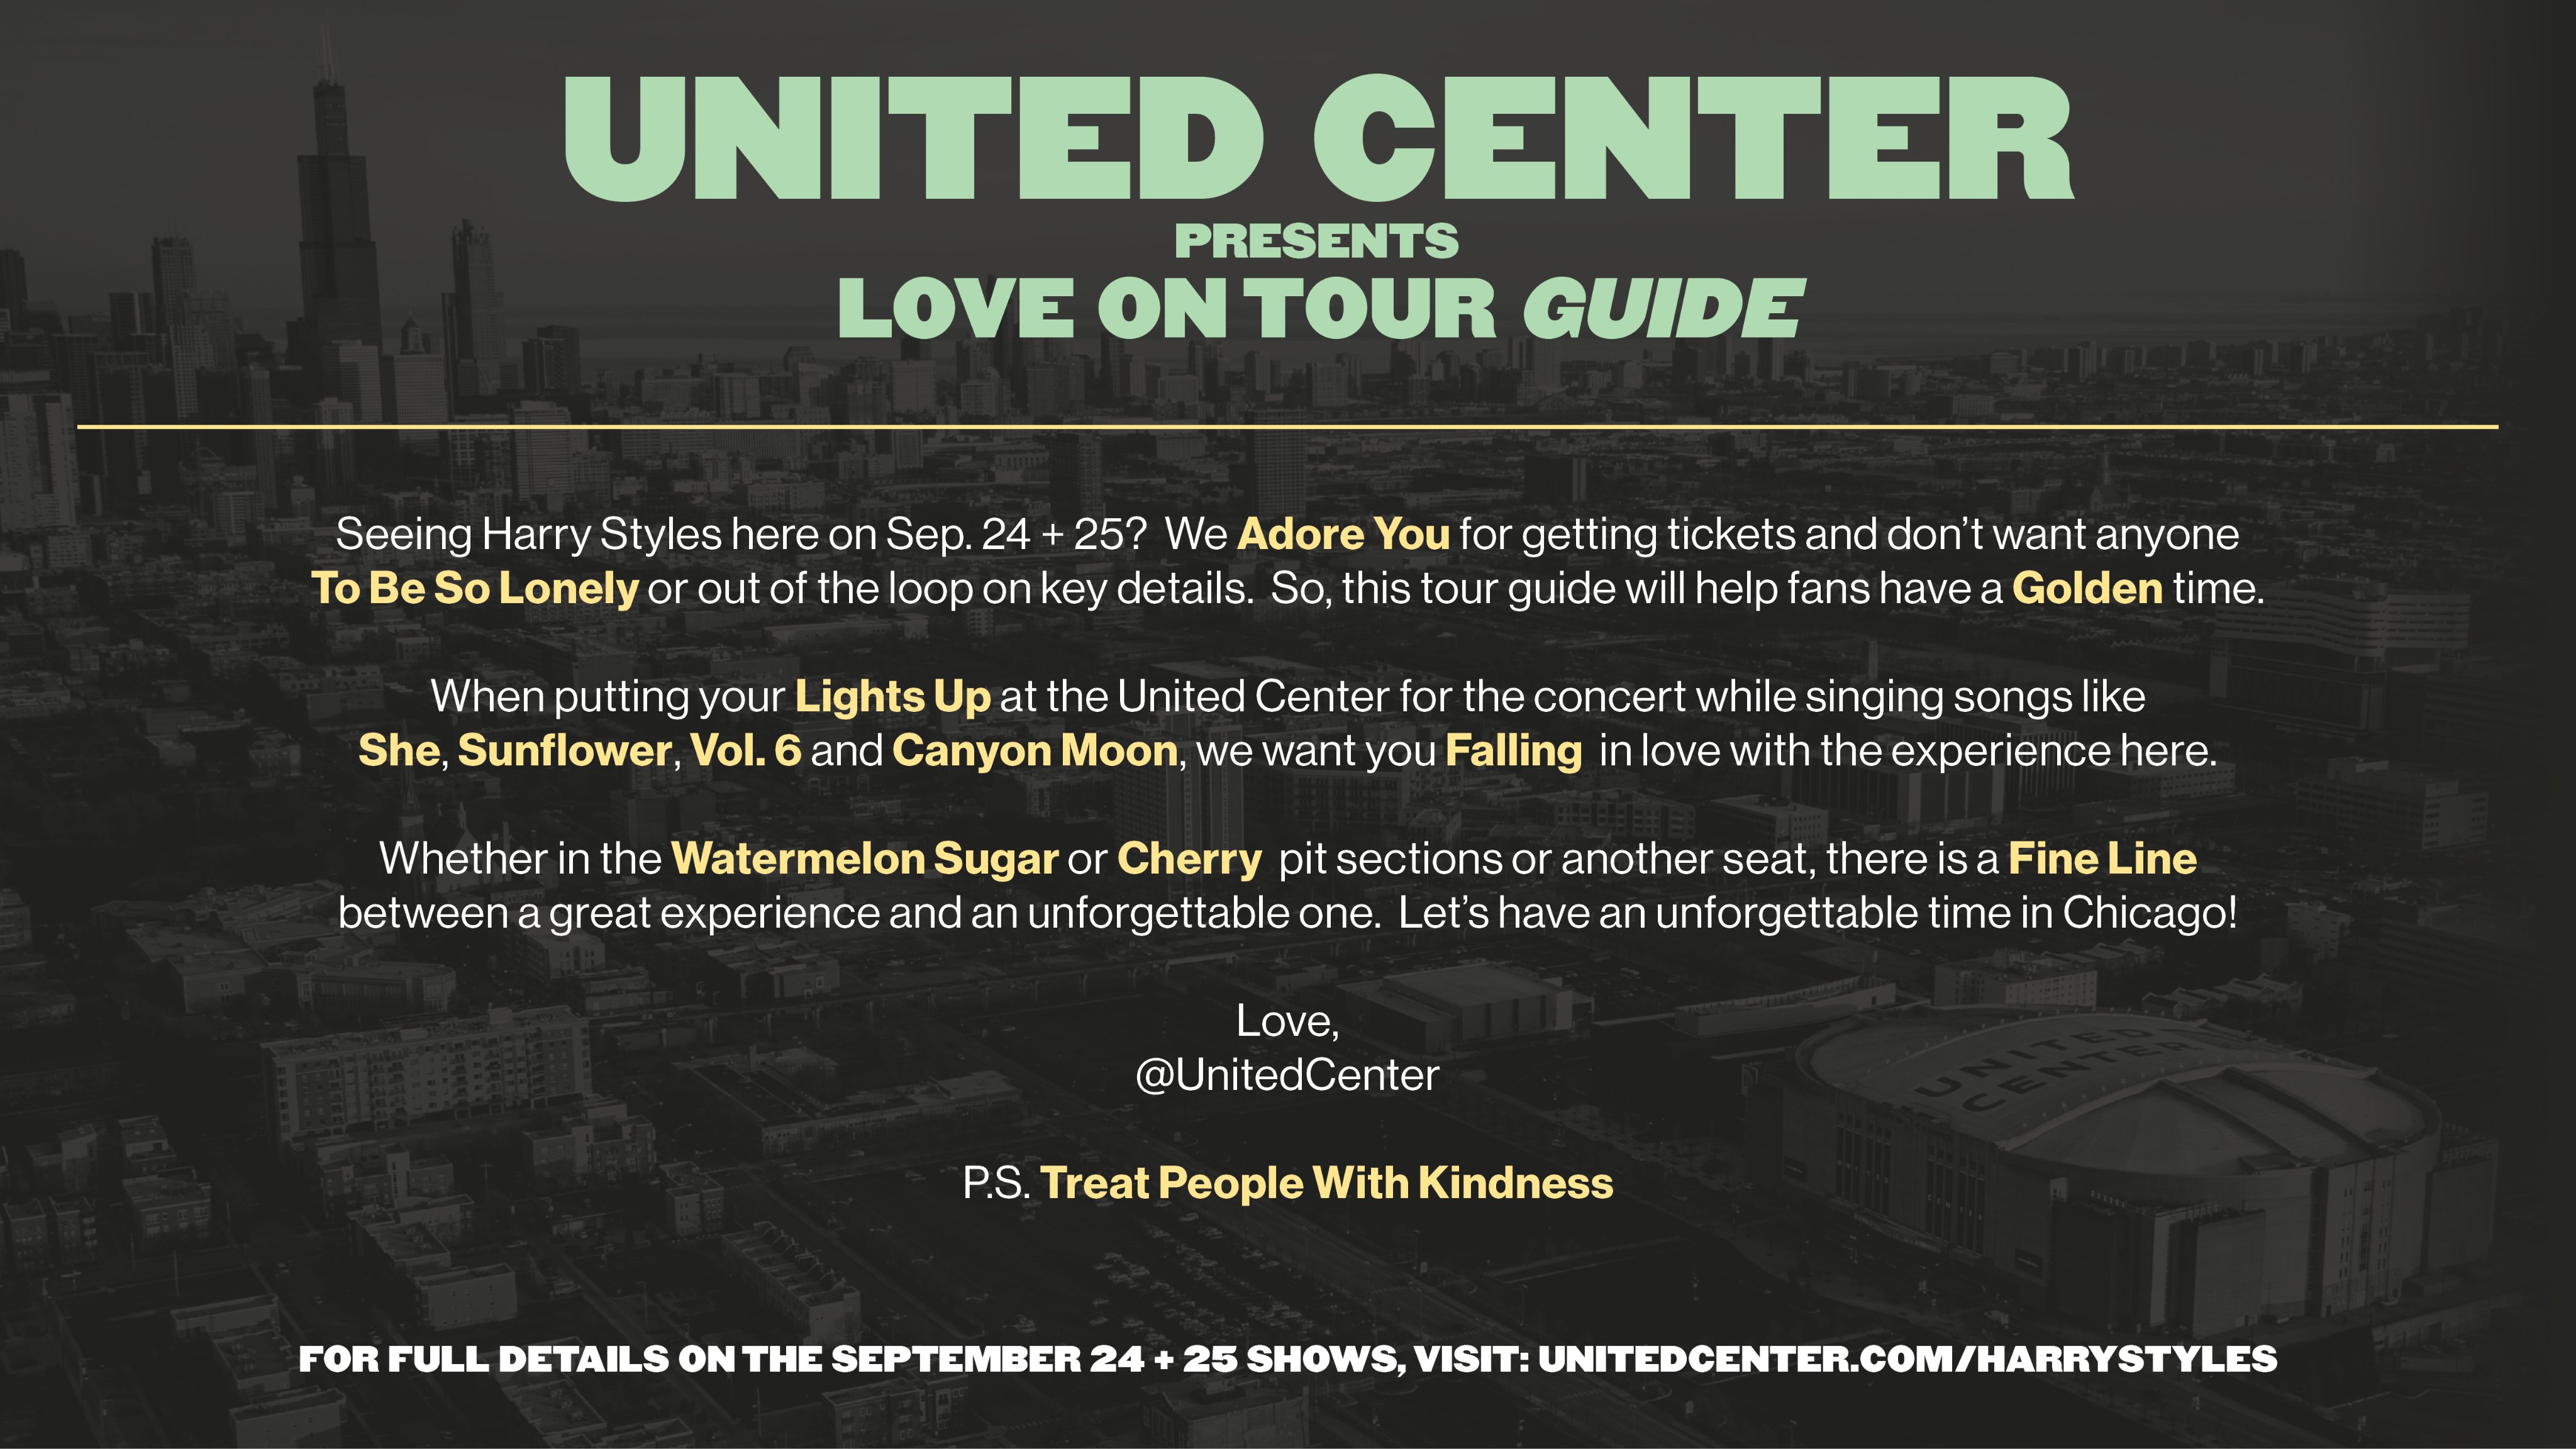 United Center Excited To See Harry Styles Here In Chicago On Sep 24 25 For Loveontour Everything You Need To Know For A Golden Experience Is Featured In Our